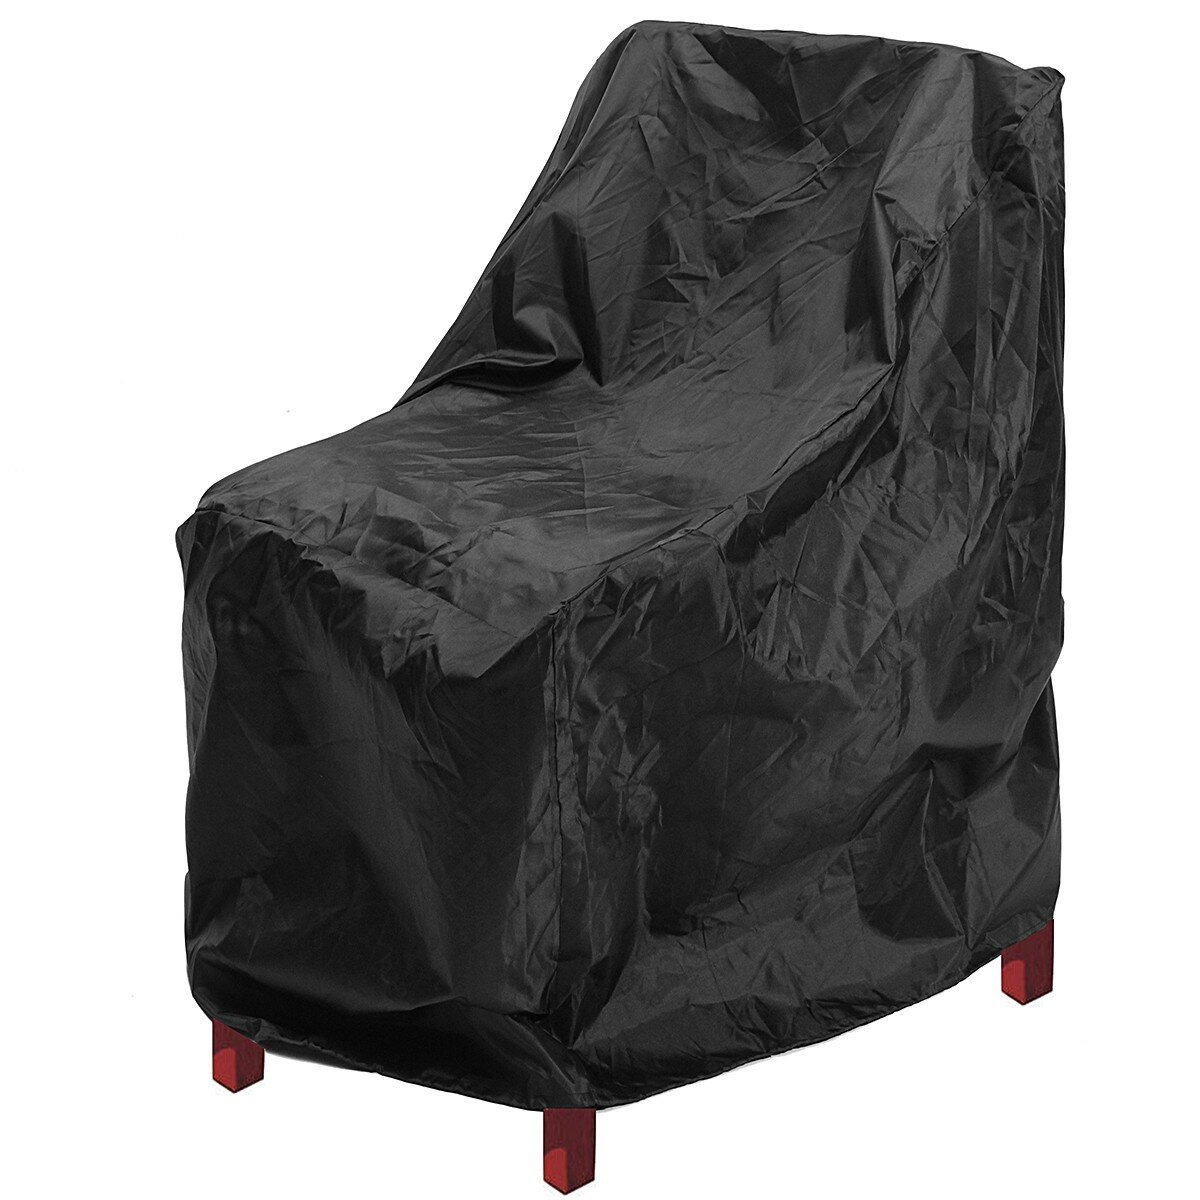 KING DO WAY 210D Oxford Fiber Chair Cover Waterproof Anti-UV Tear-resistant Chair Cover